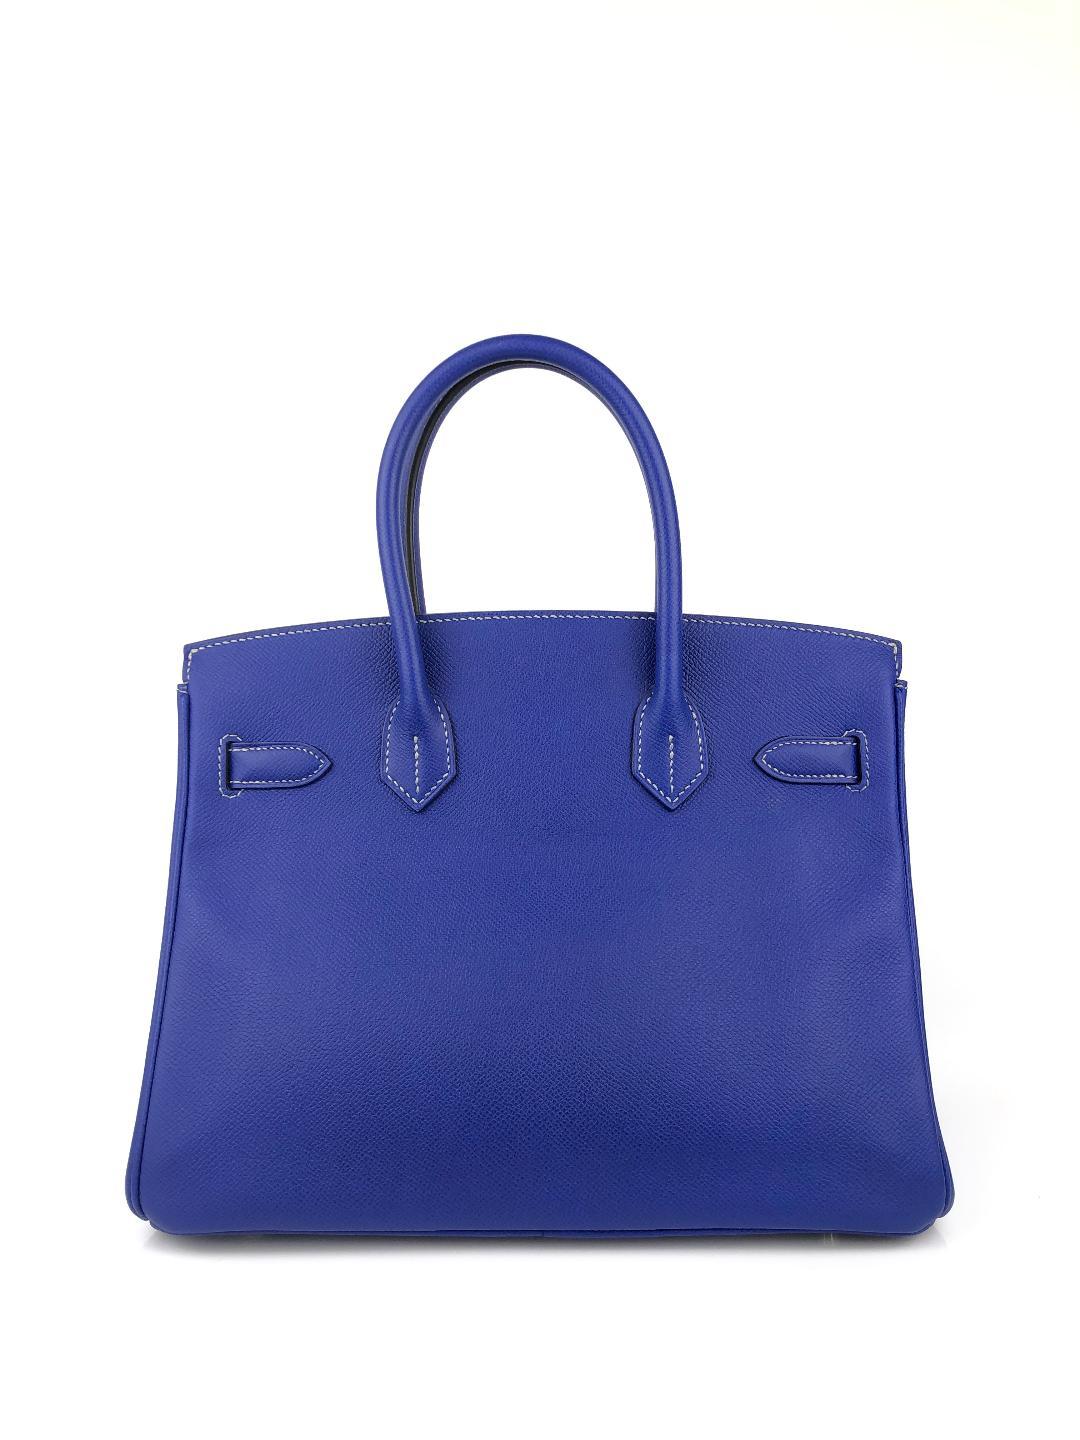 This authentic Hermès Blue Electric Epsom 30 cm Birkin is in pristine condition.   Considered the ultimate luxury item, the Hermès Birkin is stitched by hand. Long waitlists are commonplace.   Bleu Electrique, a vibrant blue, is a brilliant pop